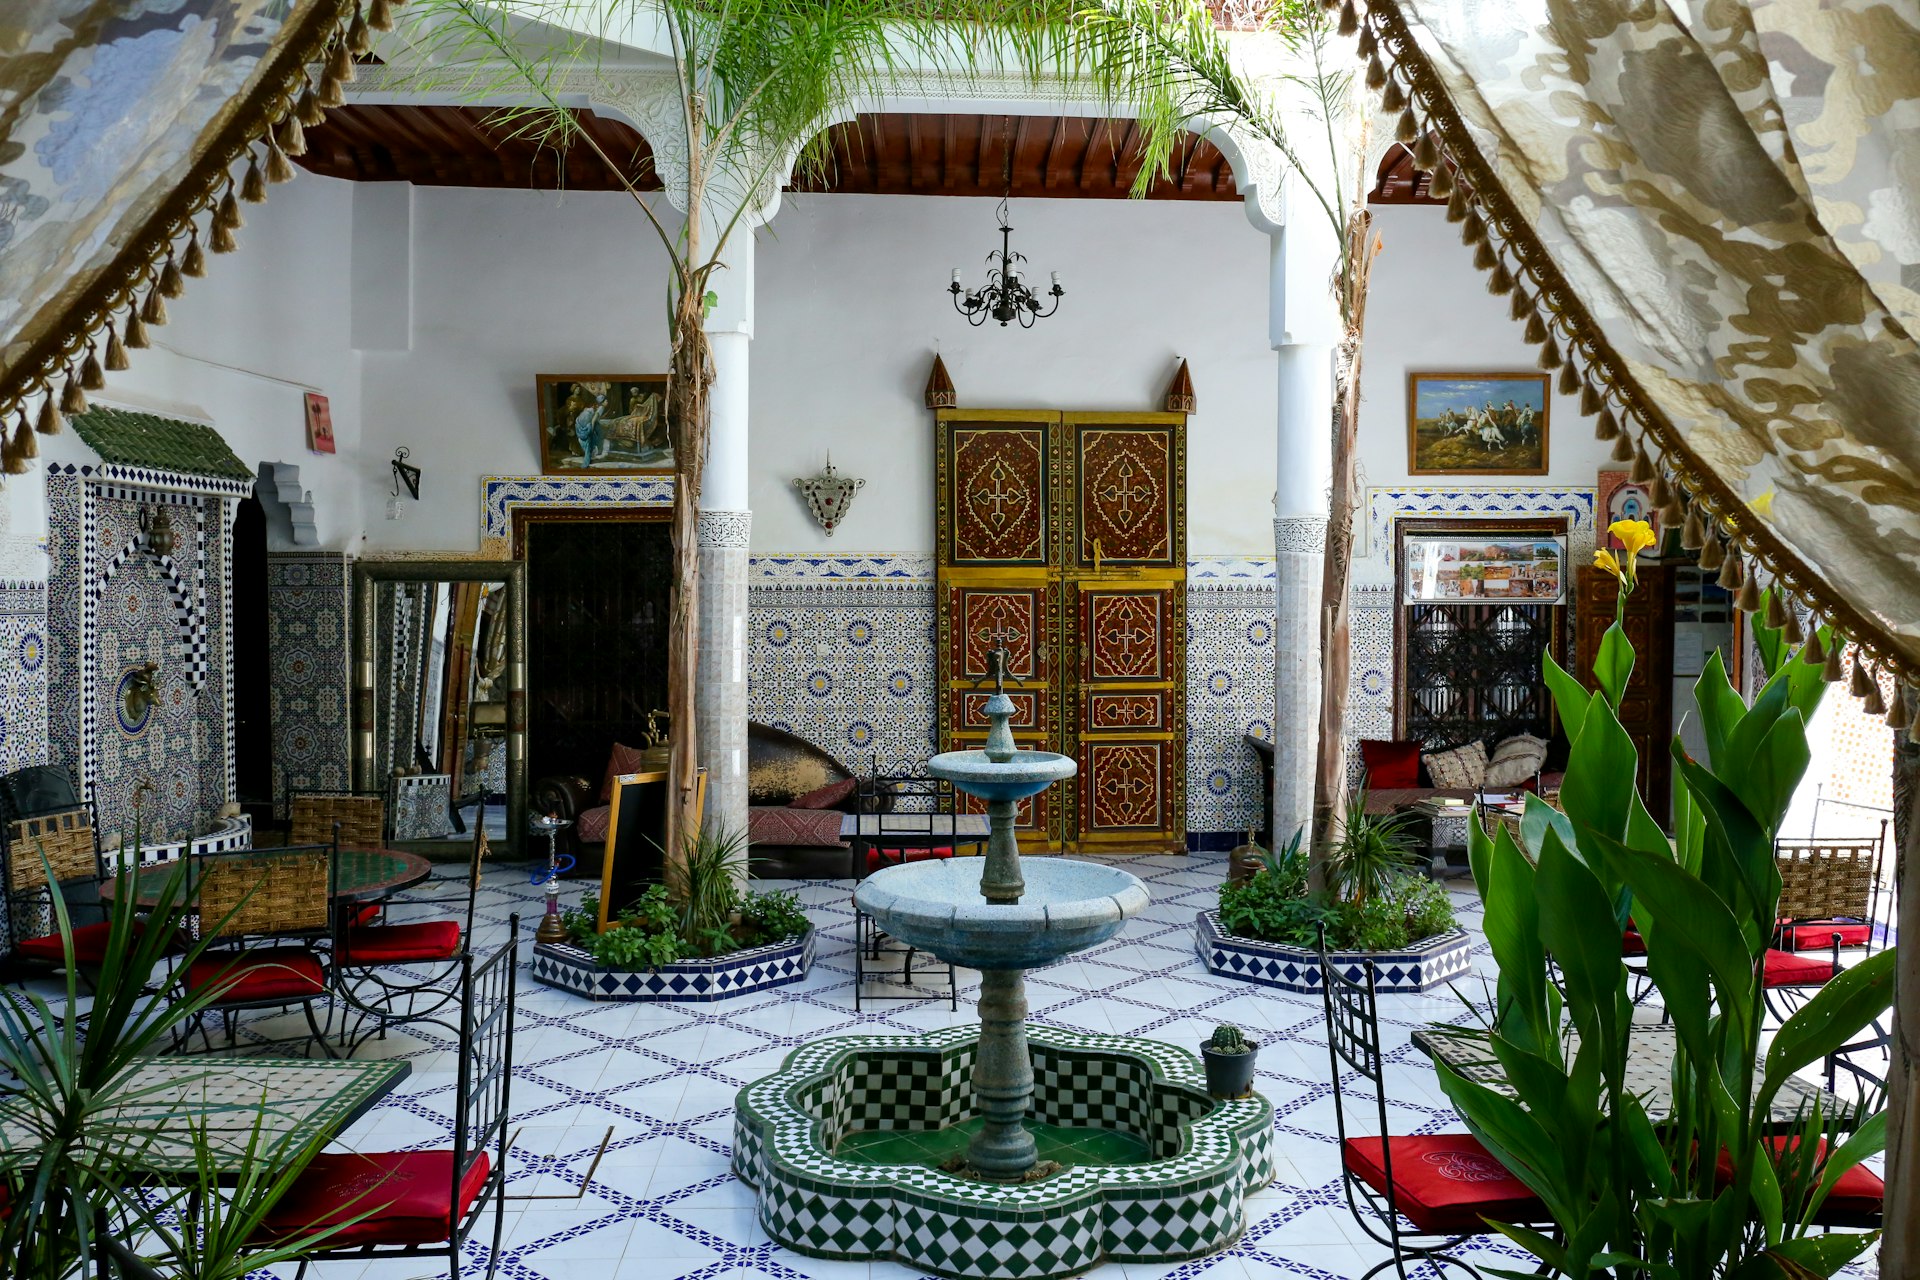 Inside of a traditional riad in Marrakesh, Morocco